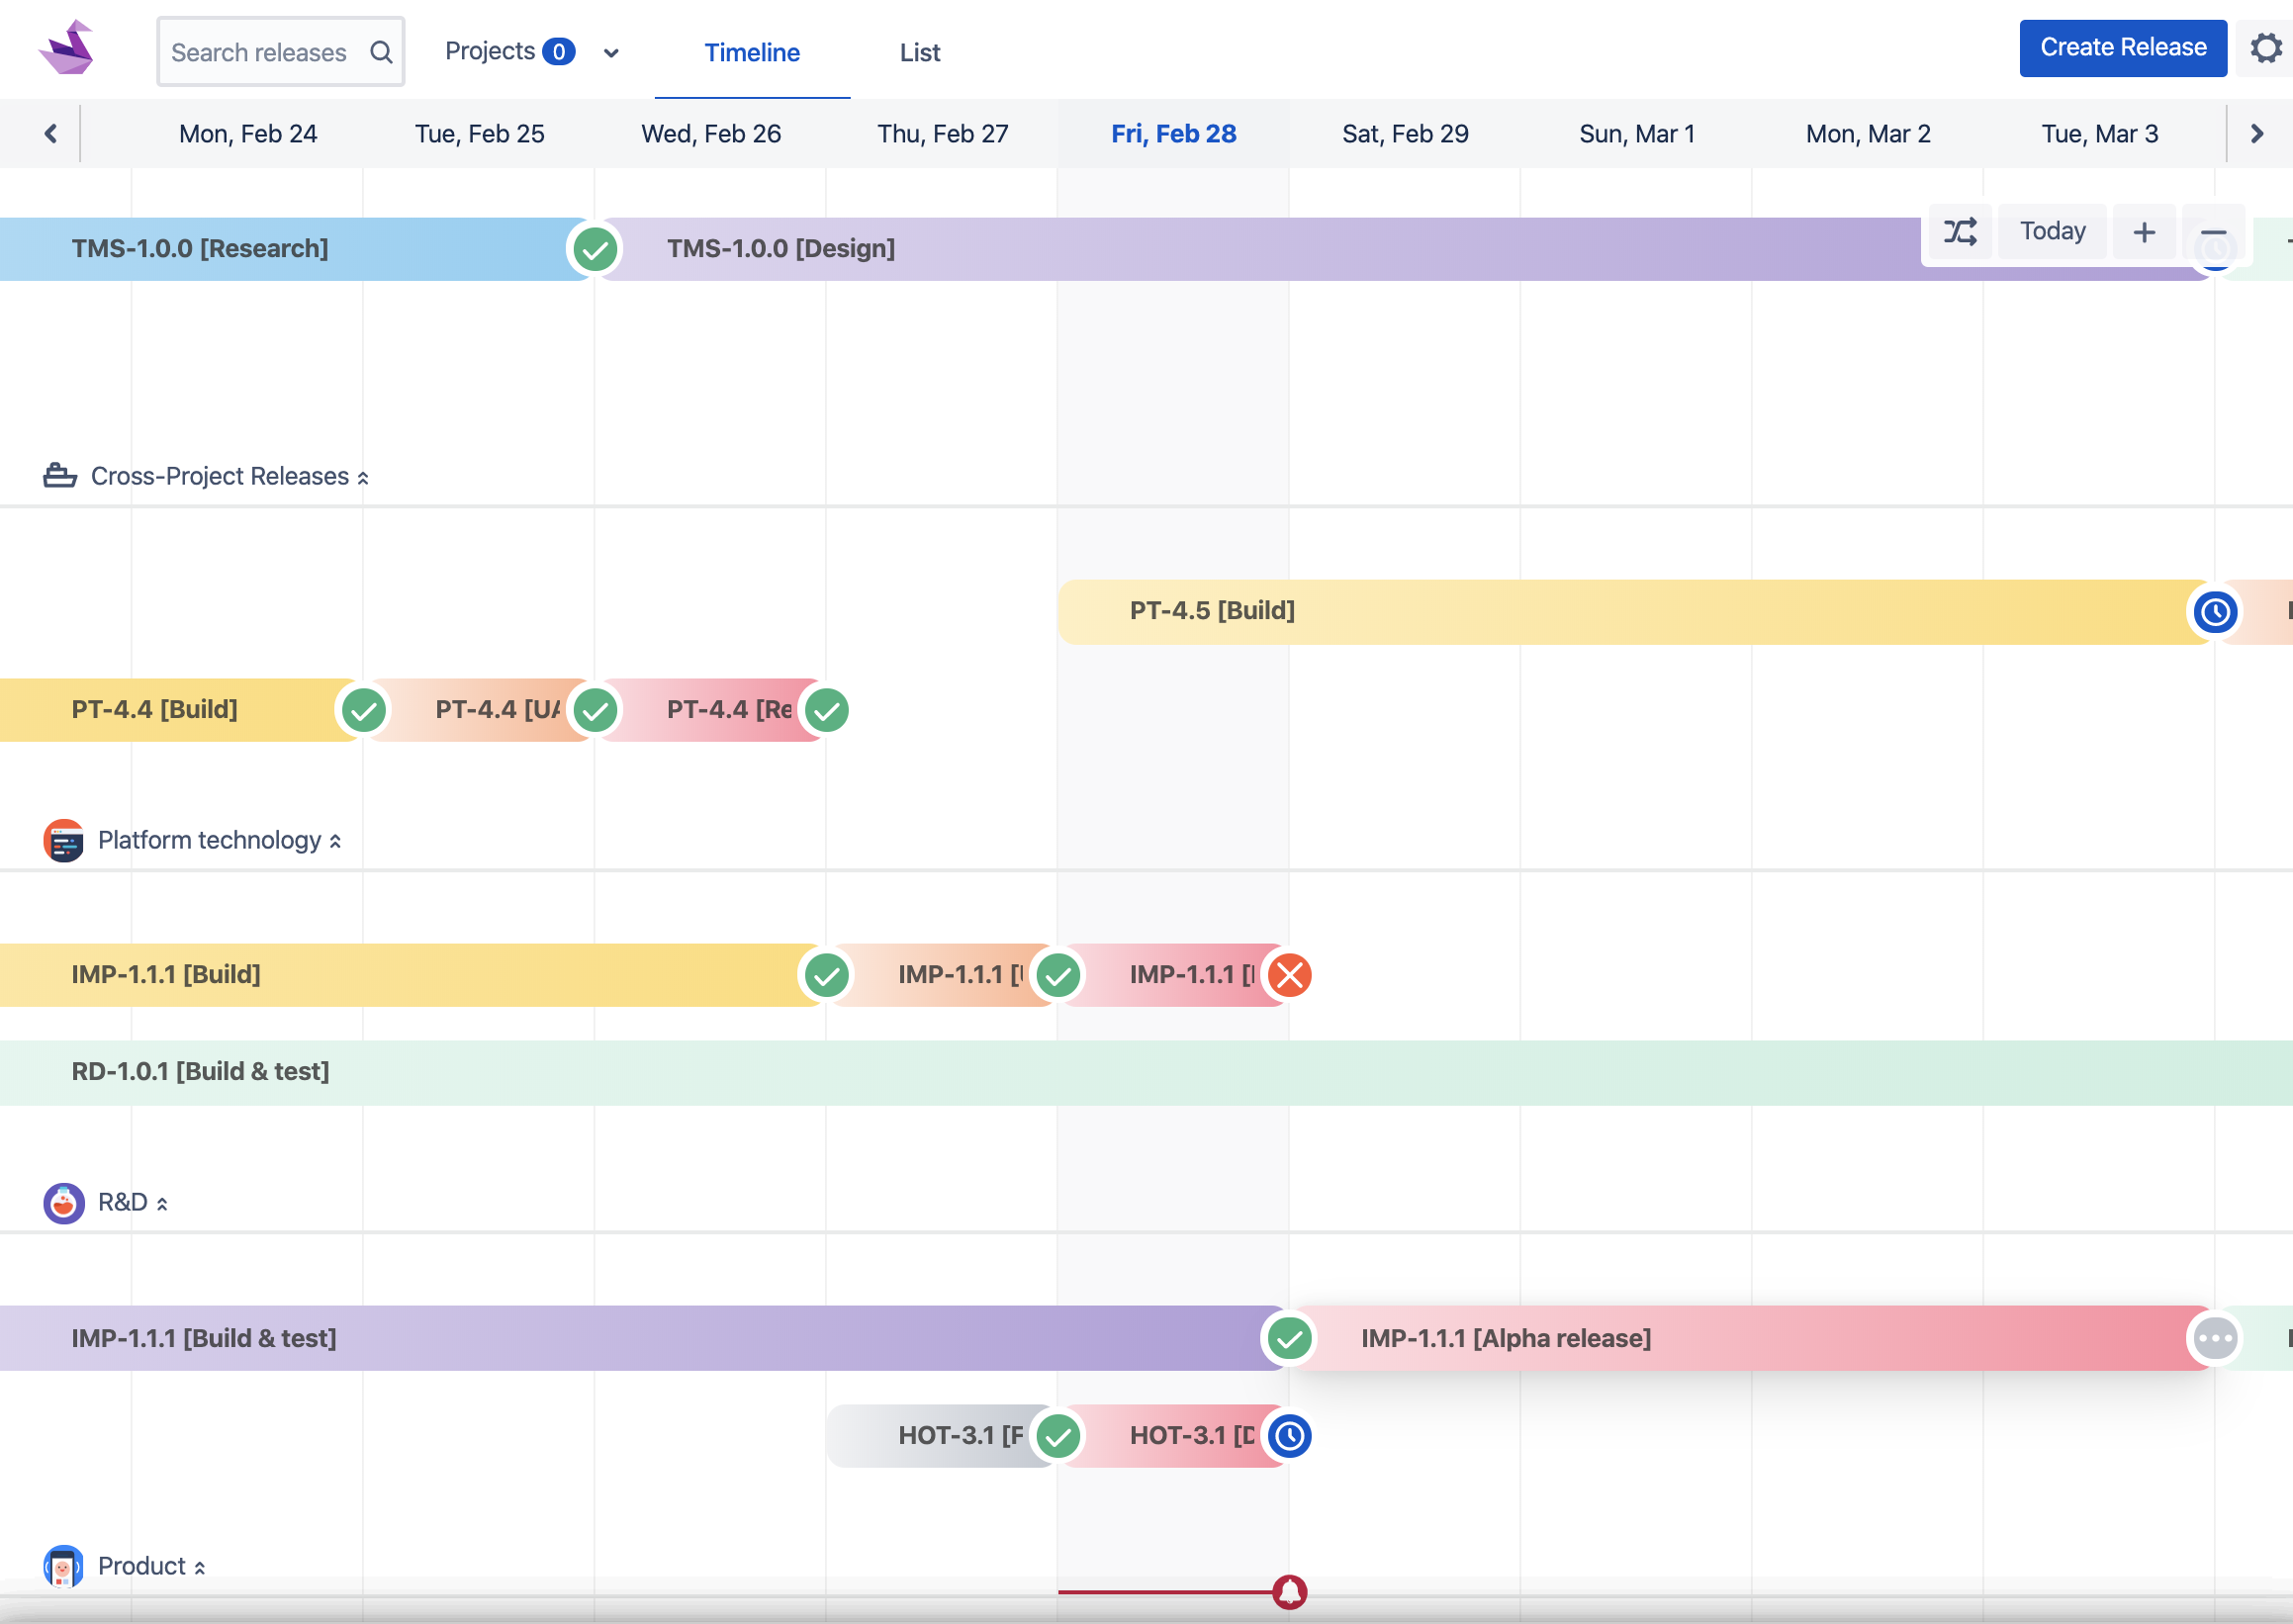 Show releases in a calendar view